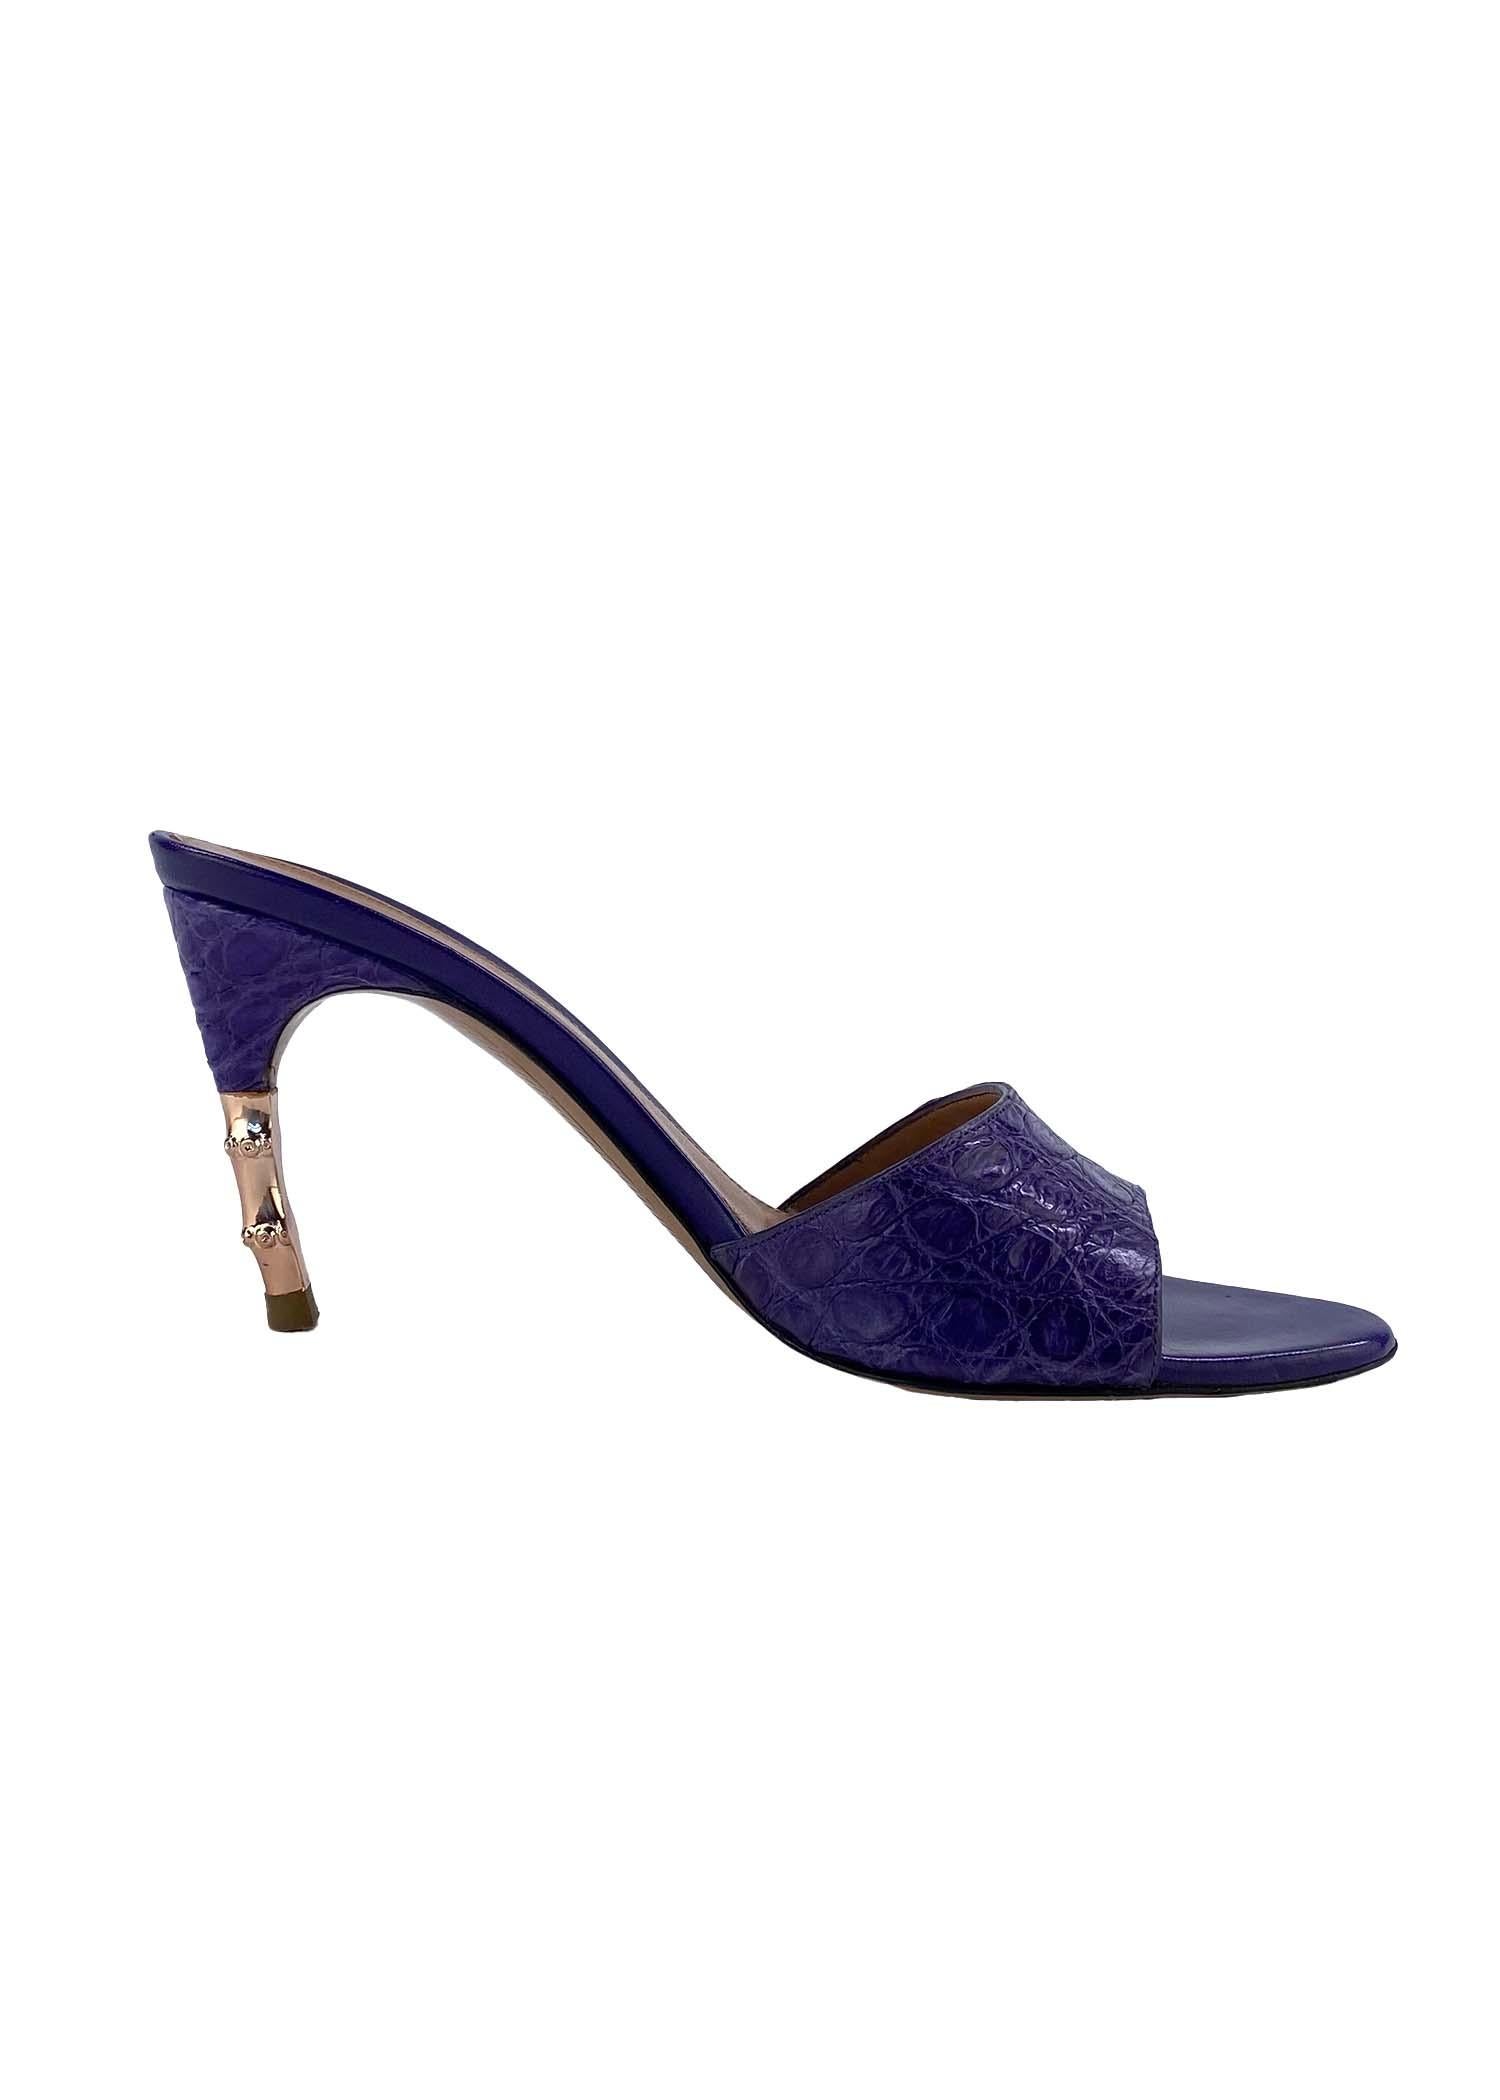 Presenting a stunning pair of crocodile Gucci heel slides, designed by Tom Ford. This beautiful pair of heels are constructed of purple crocodile skin at the exterior and leather at the interior. The shoes are a part of Ford's Spring/Summer 2004